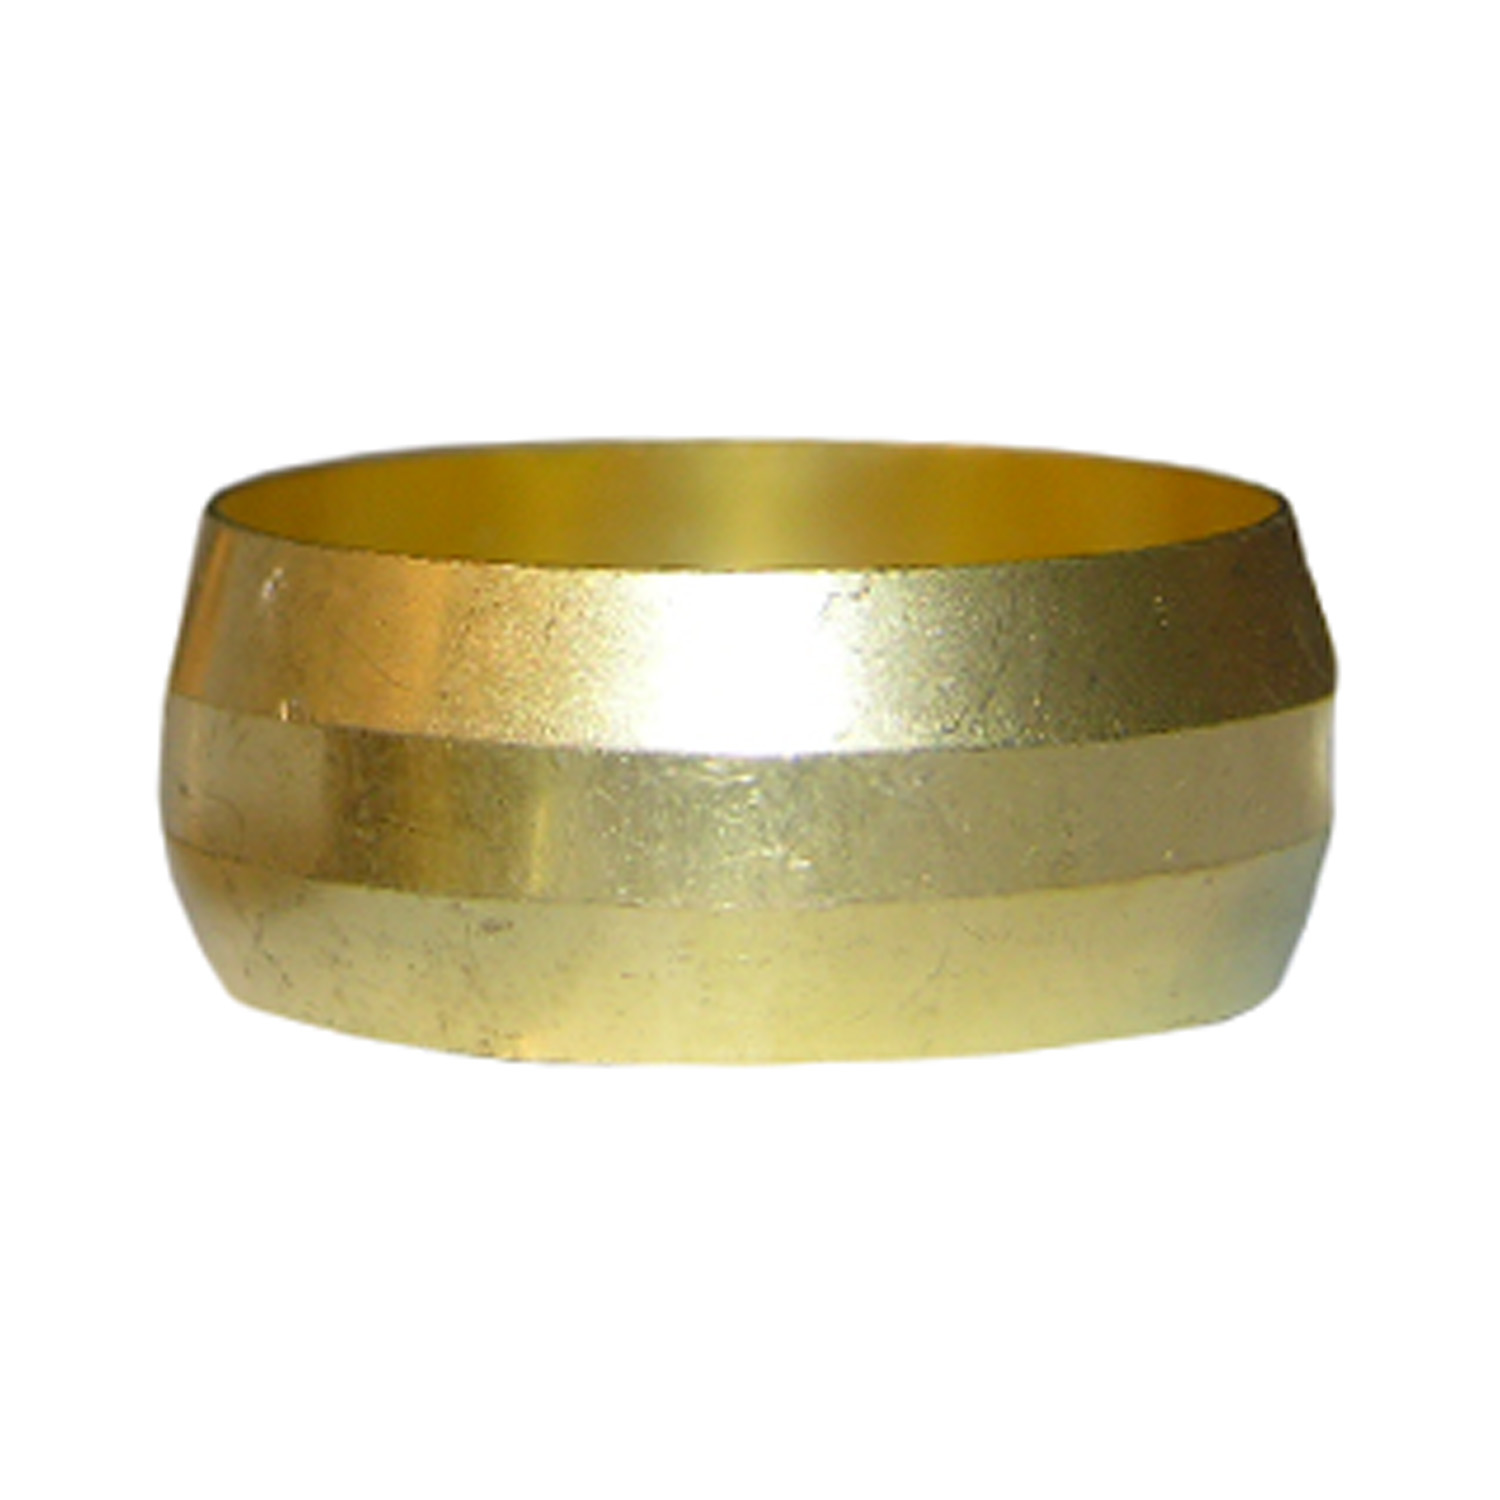 17-6073 Pipe Sleeve, 7/8 in Compression, Brass